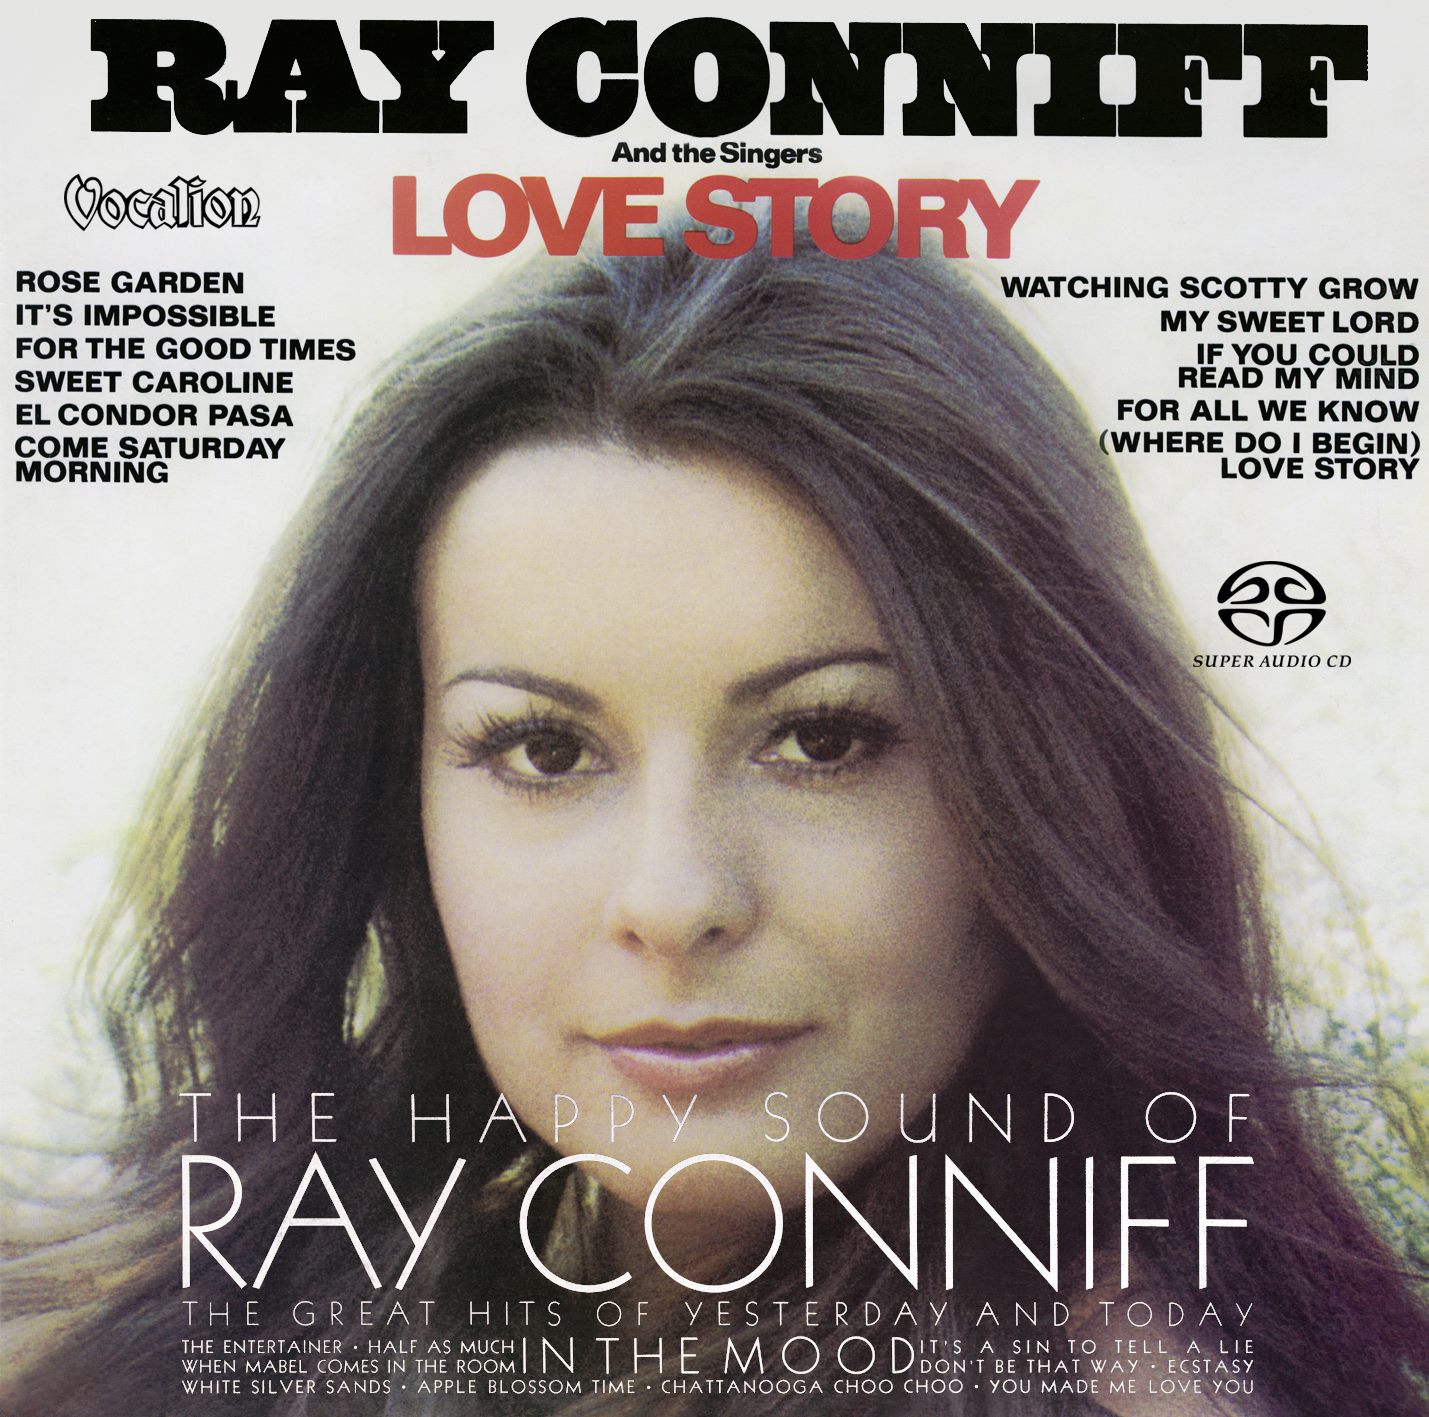 Ray Conniff - The Happy Sound Of & Love Story (1974 & 1971) [Reissue 2019] MCH SACD ISO + FLAC 24bit/96kHz